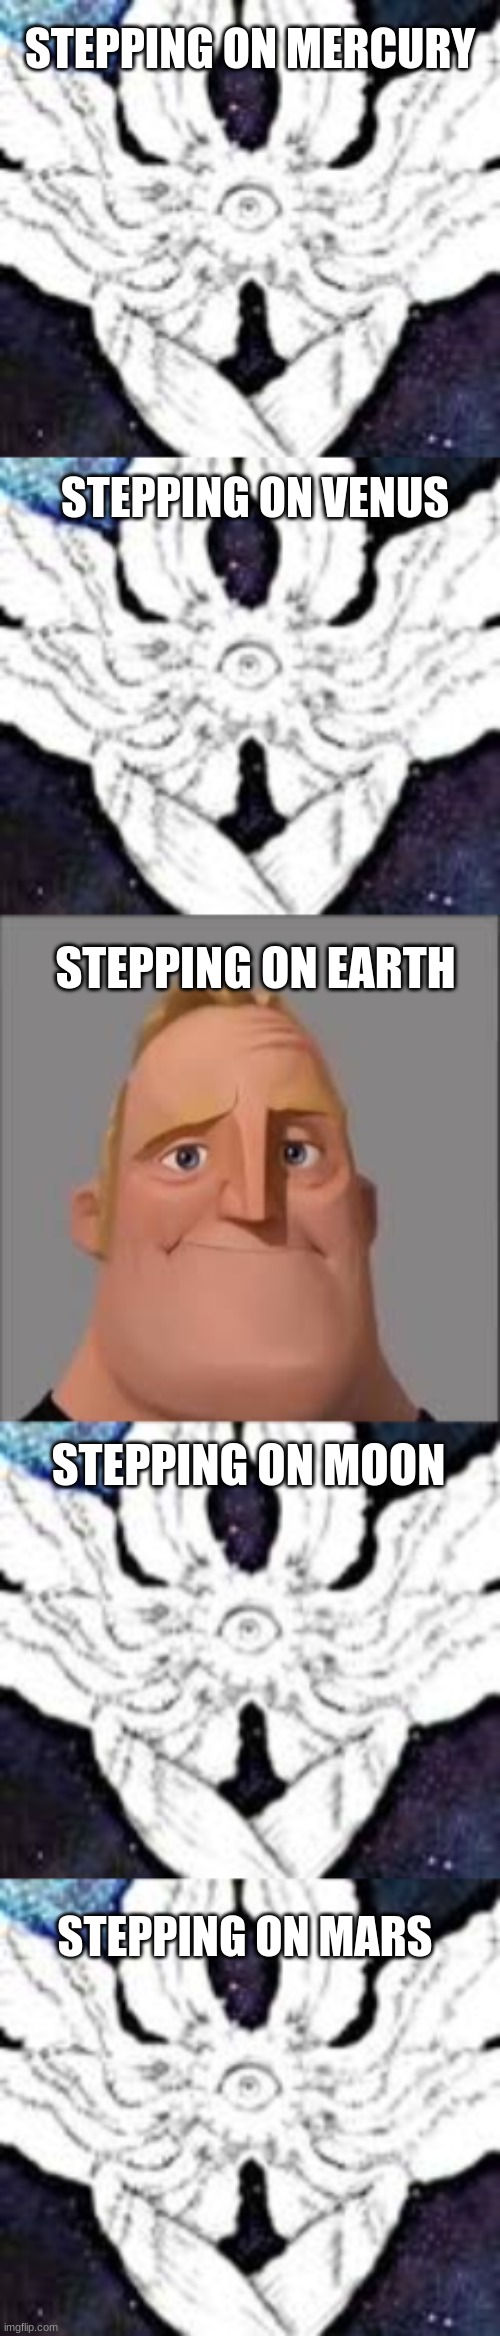 artemis meme |  STEPPING ON MERCURY; STEPPING ON VENUS; STEPPING ON EARTH; STEPPING ON MOON; STEPPING ON MARS | image tagged in spacex,nasa,mr incredible becoming canny | made w/ Imgflip meme maker